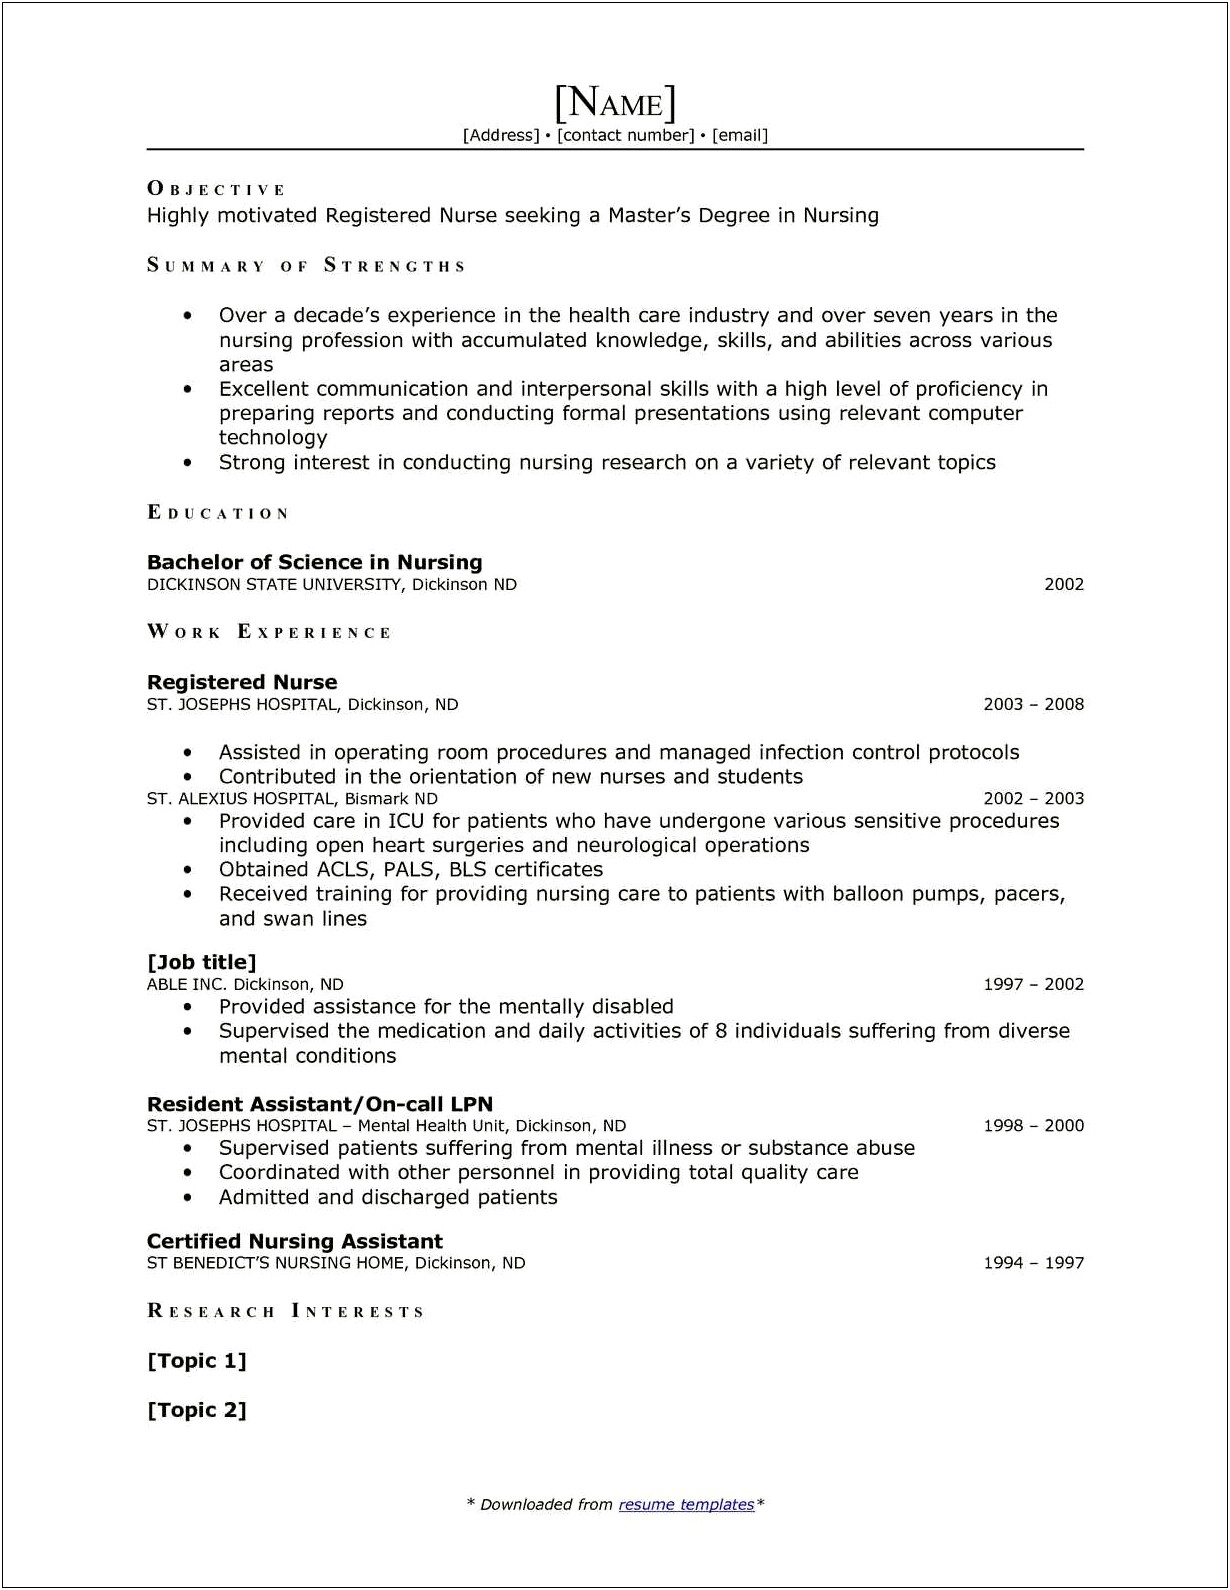 Master's Degree On Resume Example